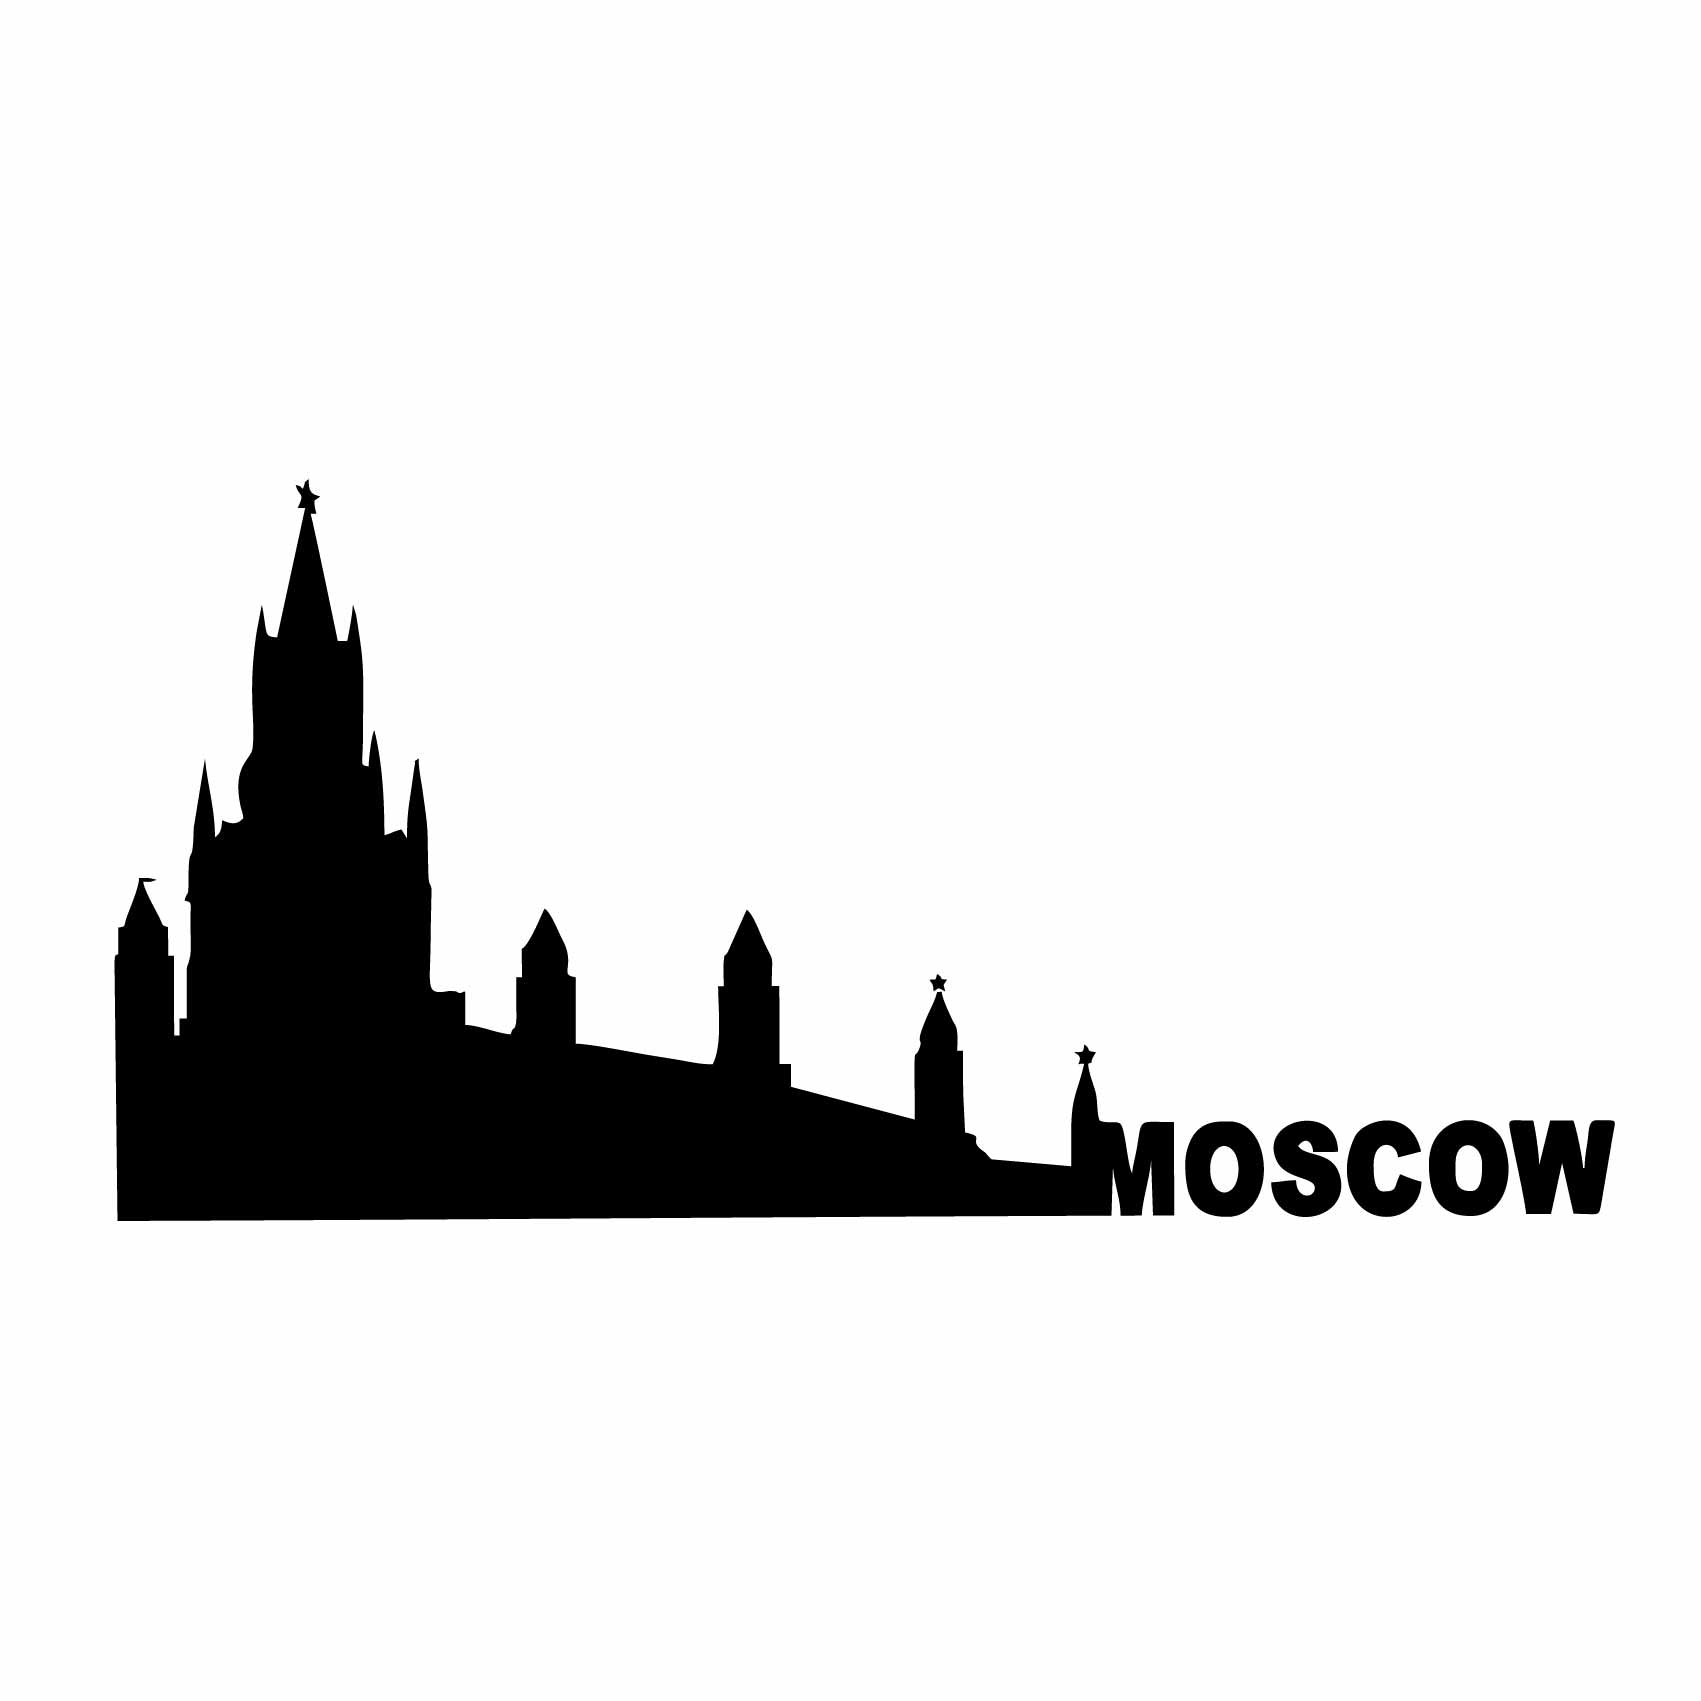 stickers-moscou-ref1moscow-autocollant-muraux-moscow-russie-russia-ville-sticker-voyage-pays-travel-monument-skyline-(2)